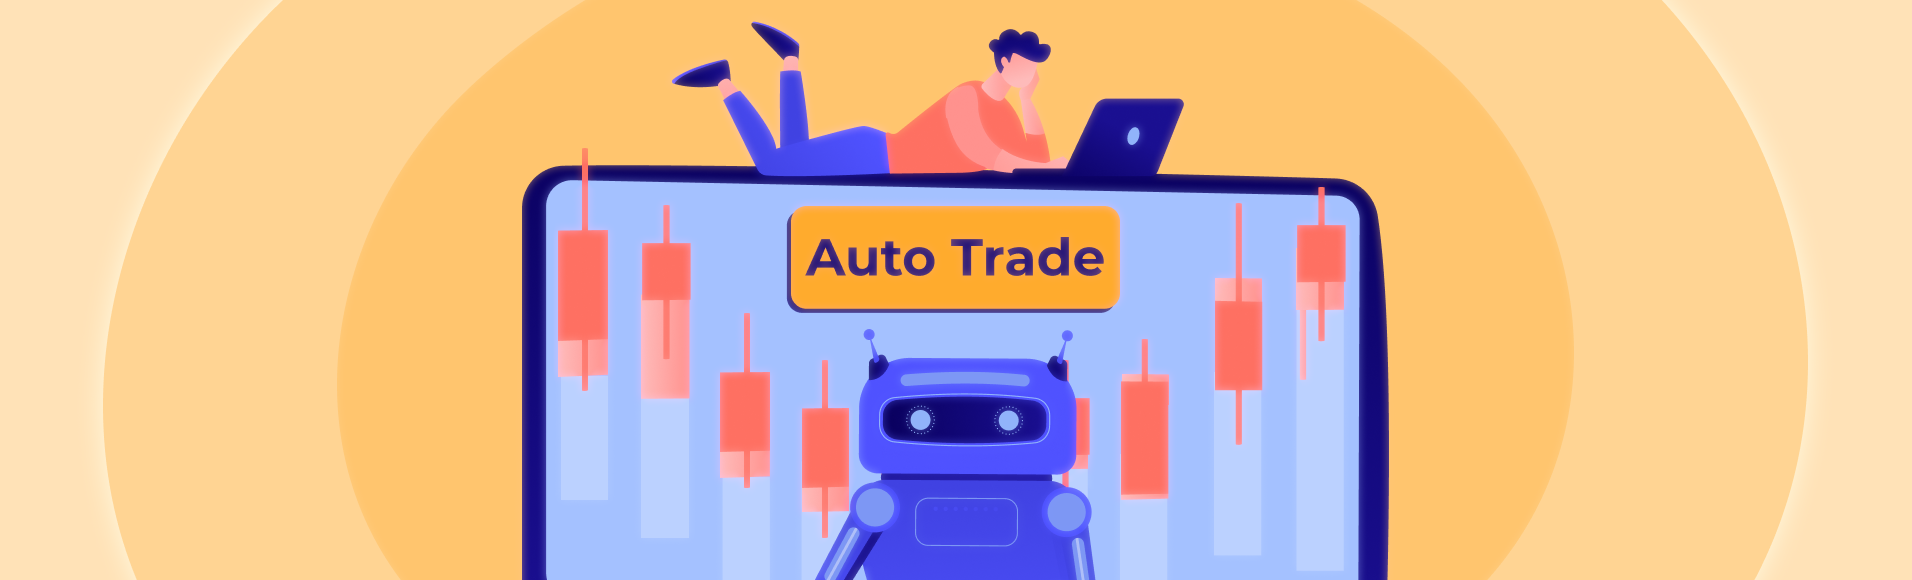 Auto trade: profit grows, you rest